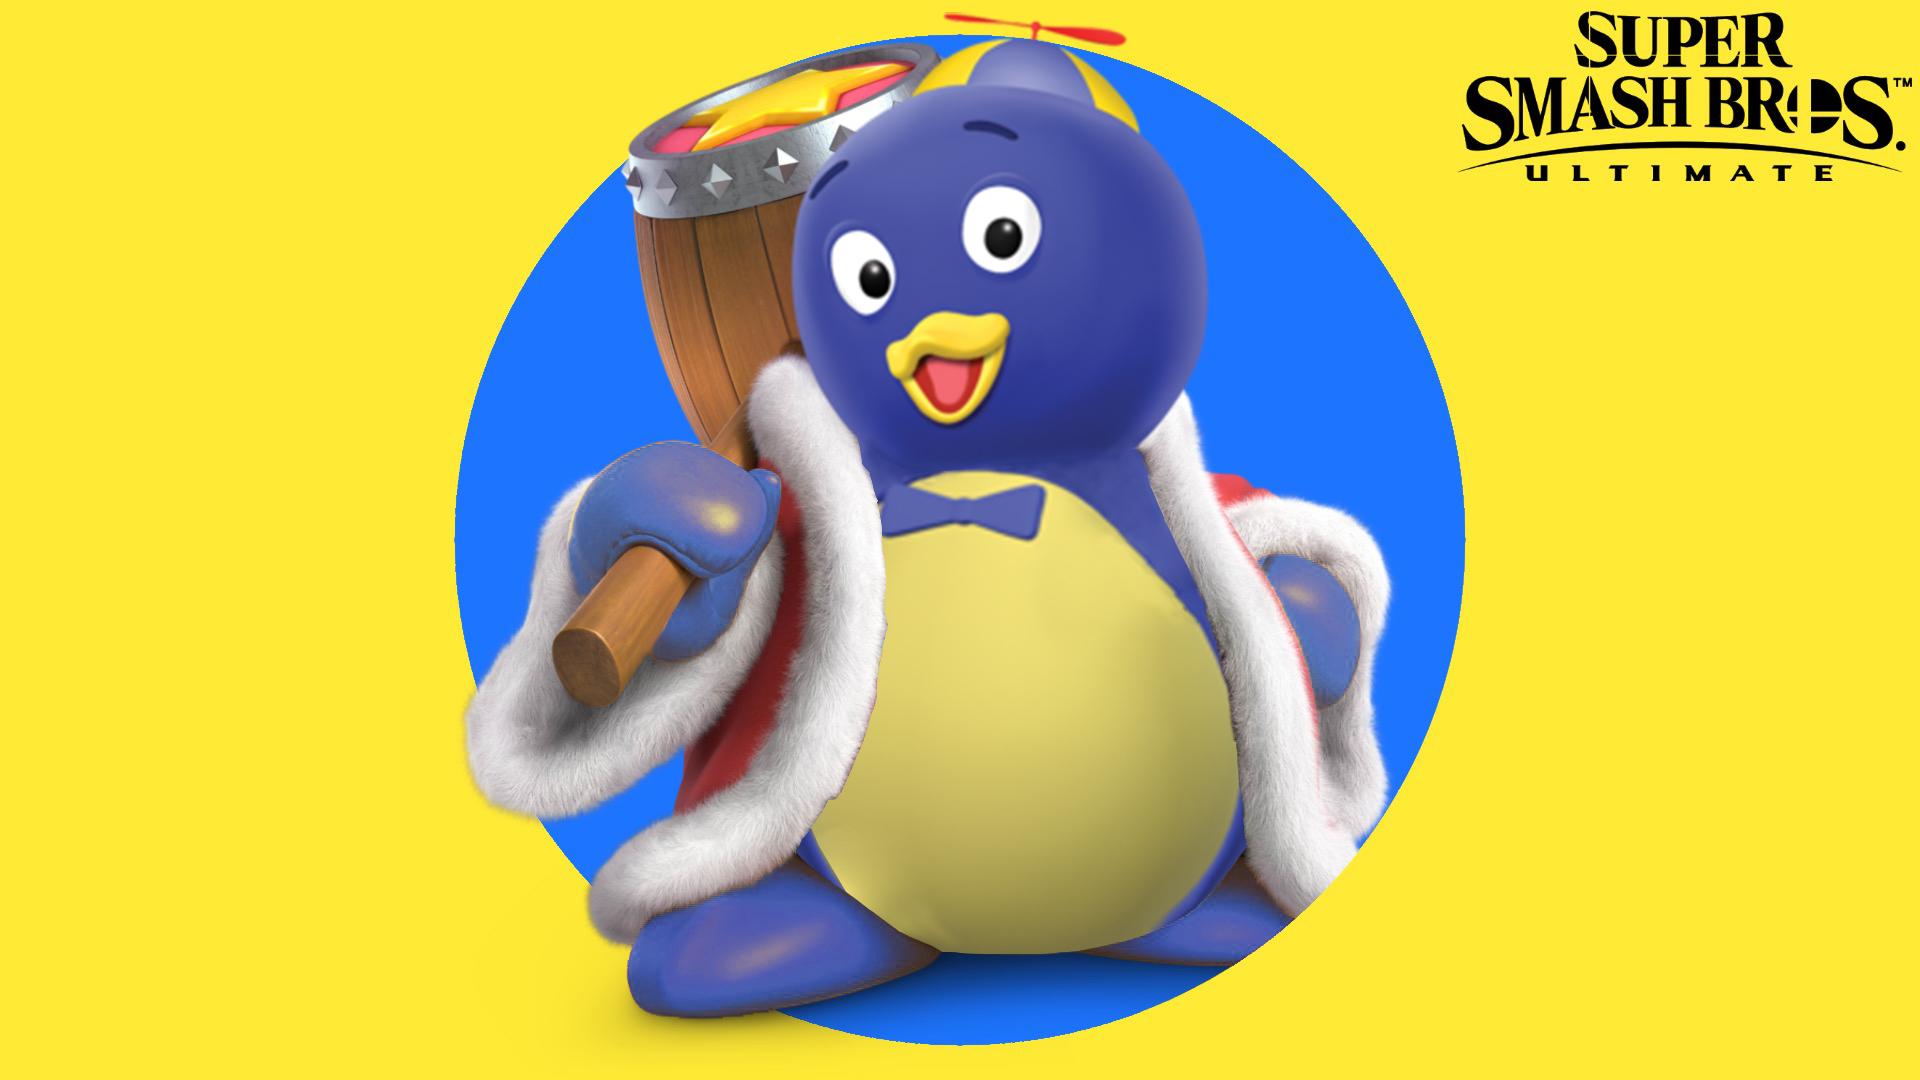 I was told to put this here. Though it's a king dedede not a Kirby